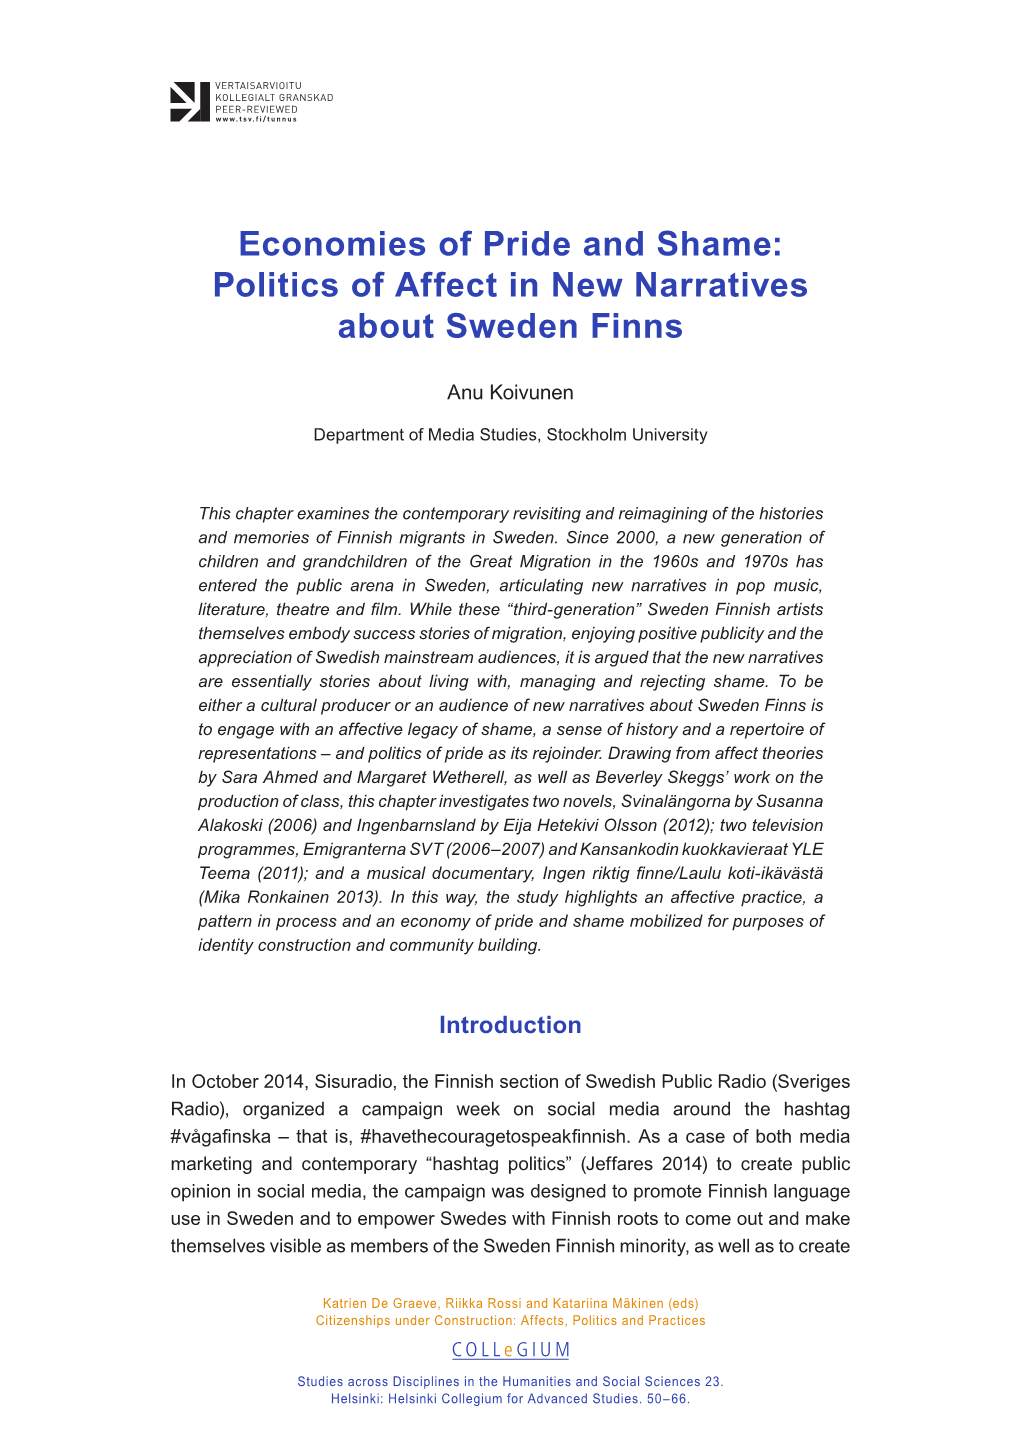 Economies of Pride and Shame: Politics of Affect in New Narratives About Sweden Finns